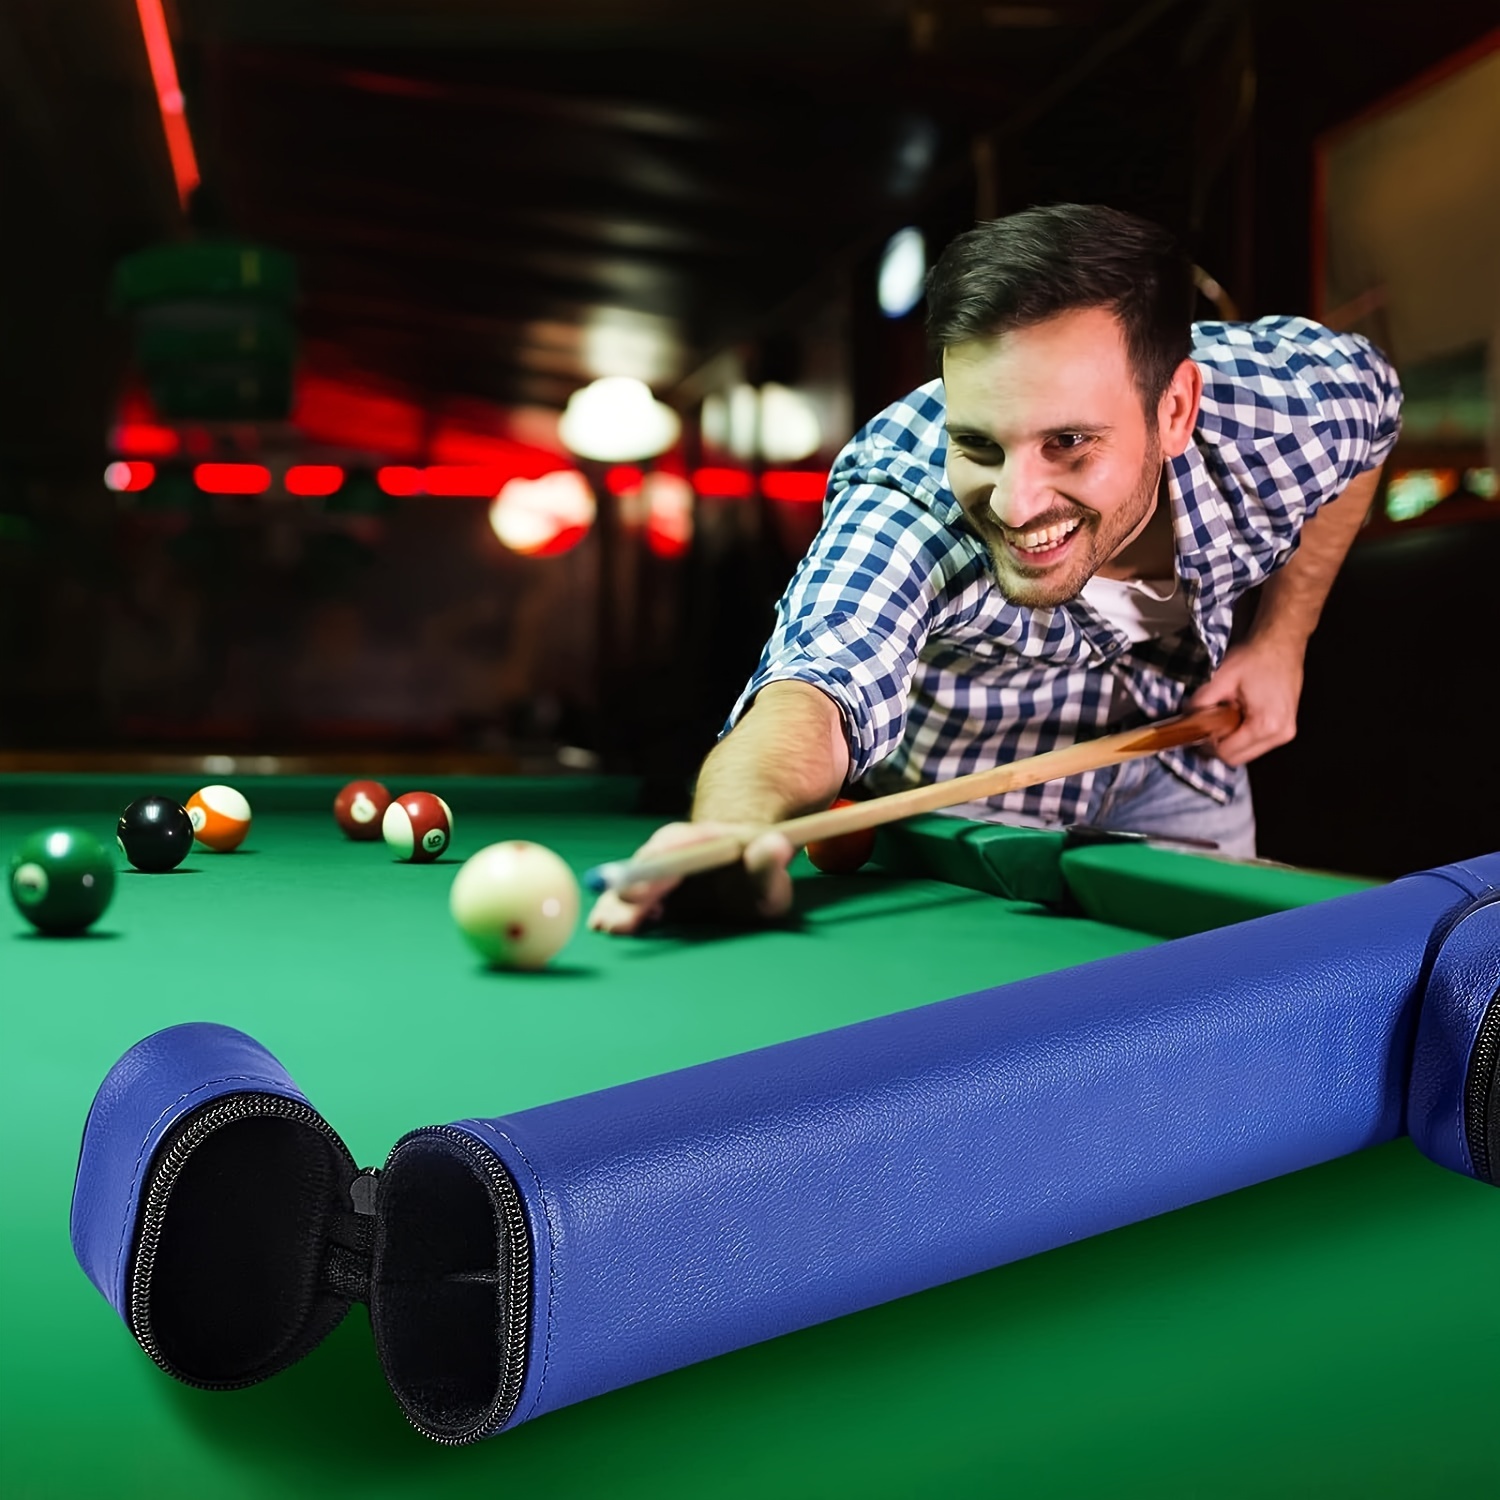 

1/2 Leather Fashionable Wear-resistant Pool Cue Holder, Billiard Cue Barrel With High Hardness